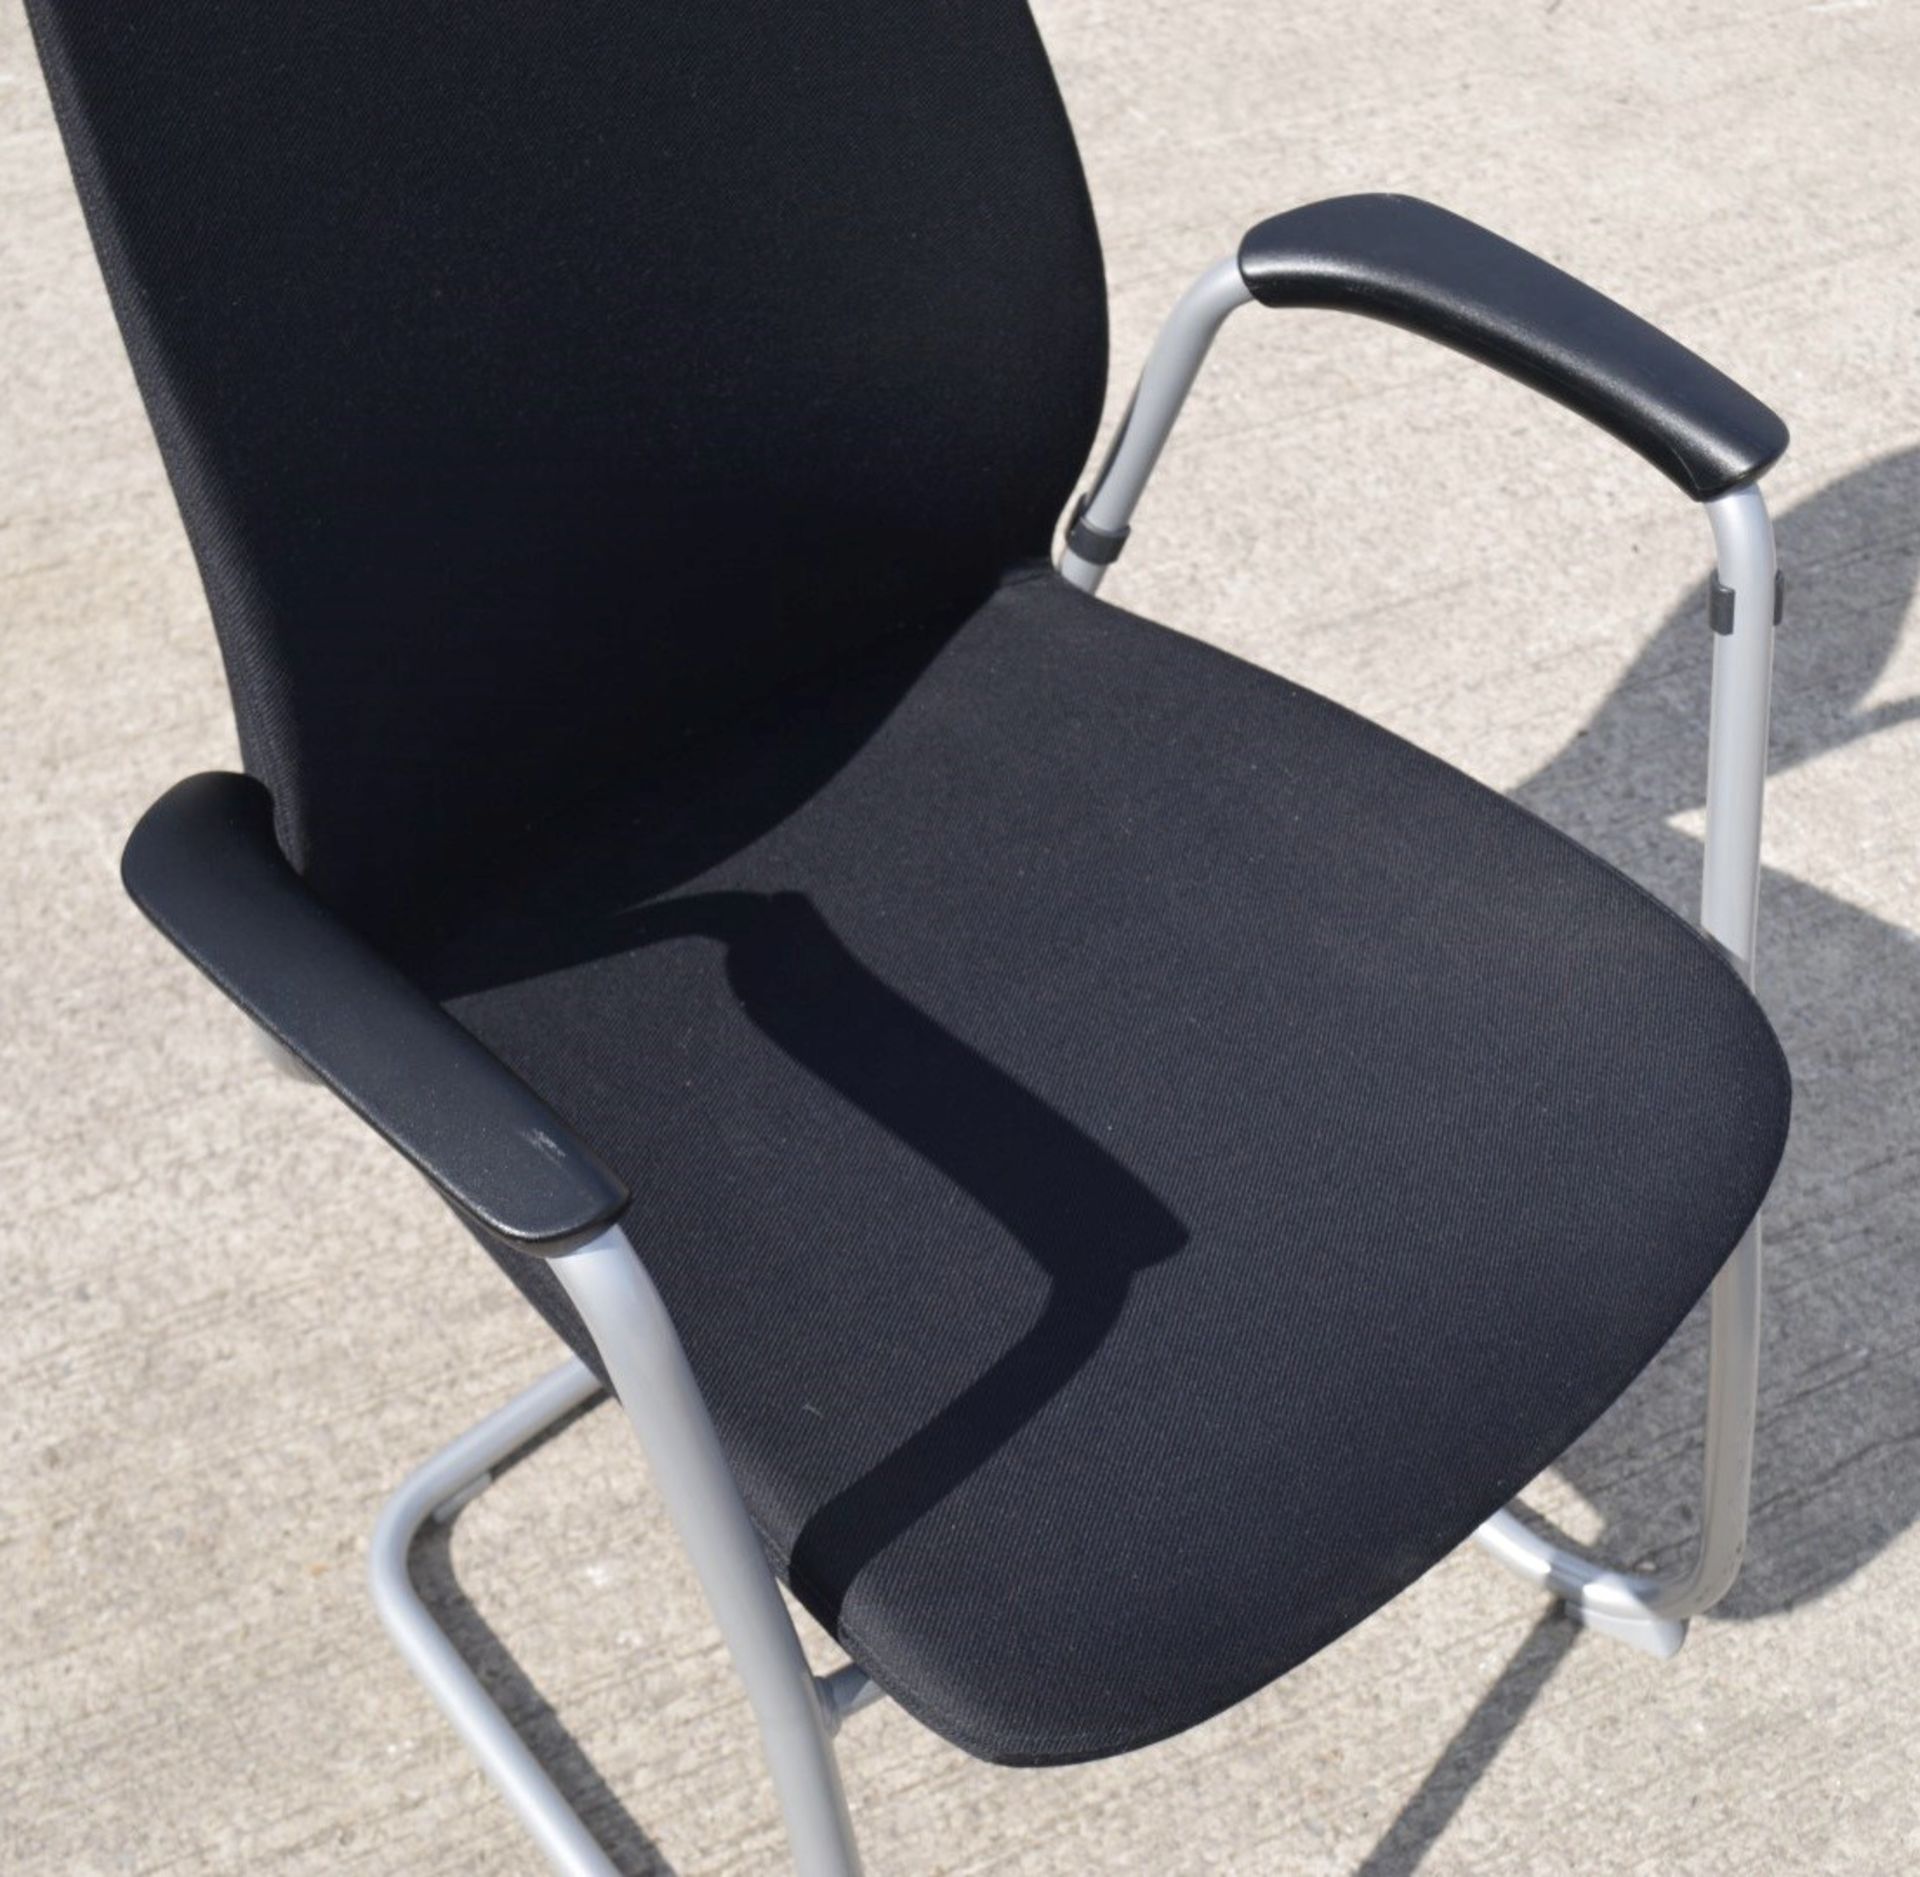 4 x Kinnarps 5000CV Meeting Chairs In Black - Dimensions: W59 x H92 x D53, Seat 45cm - Made In - Image 7 of 7